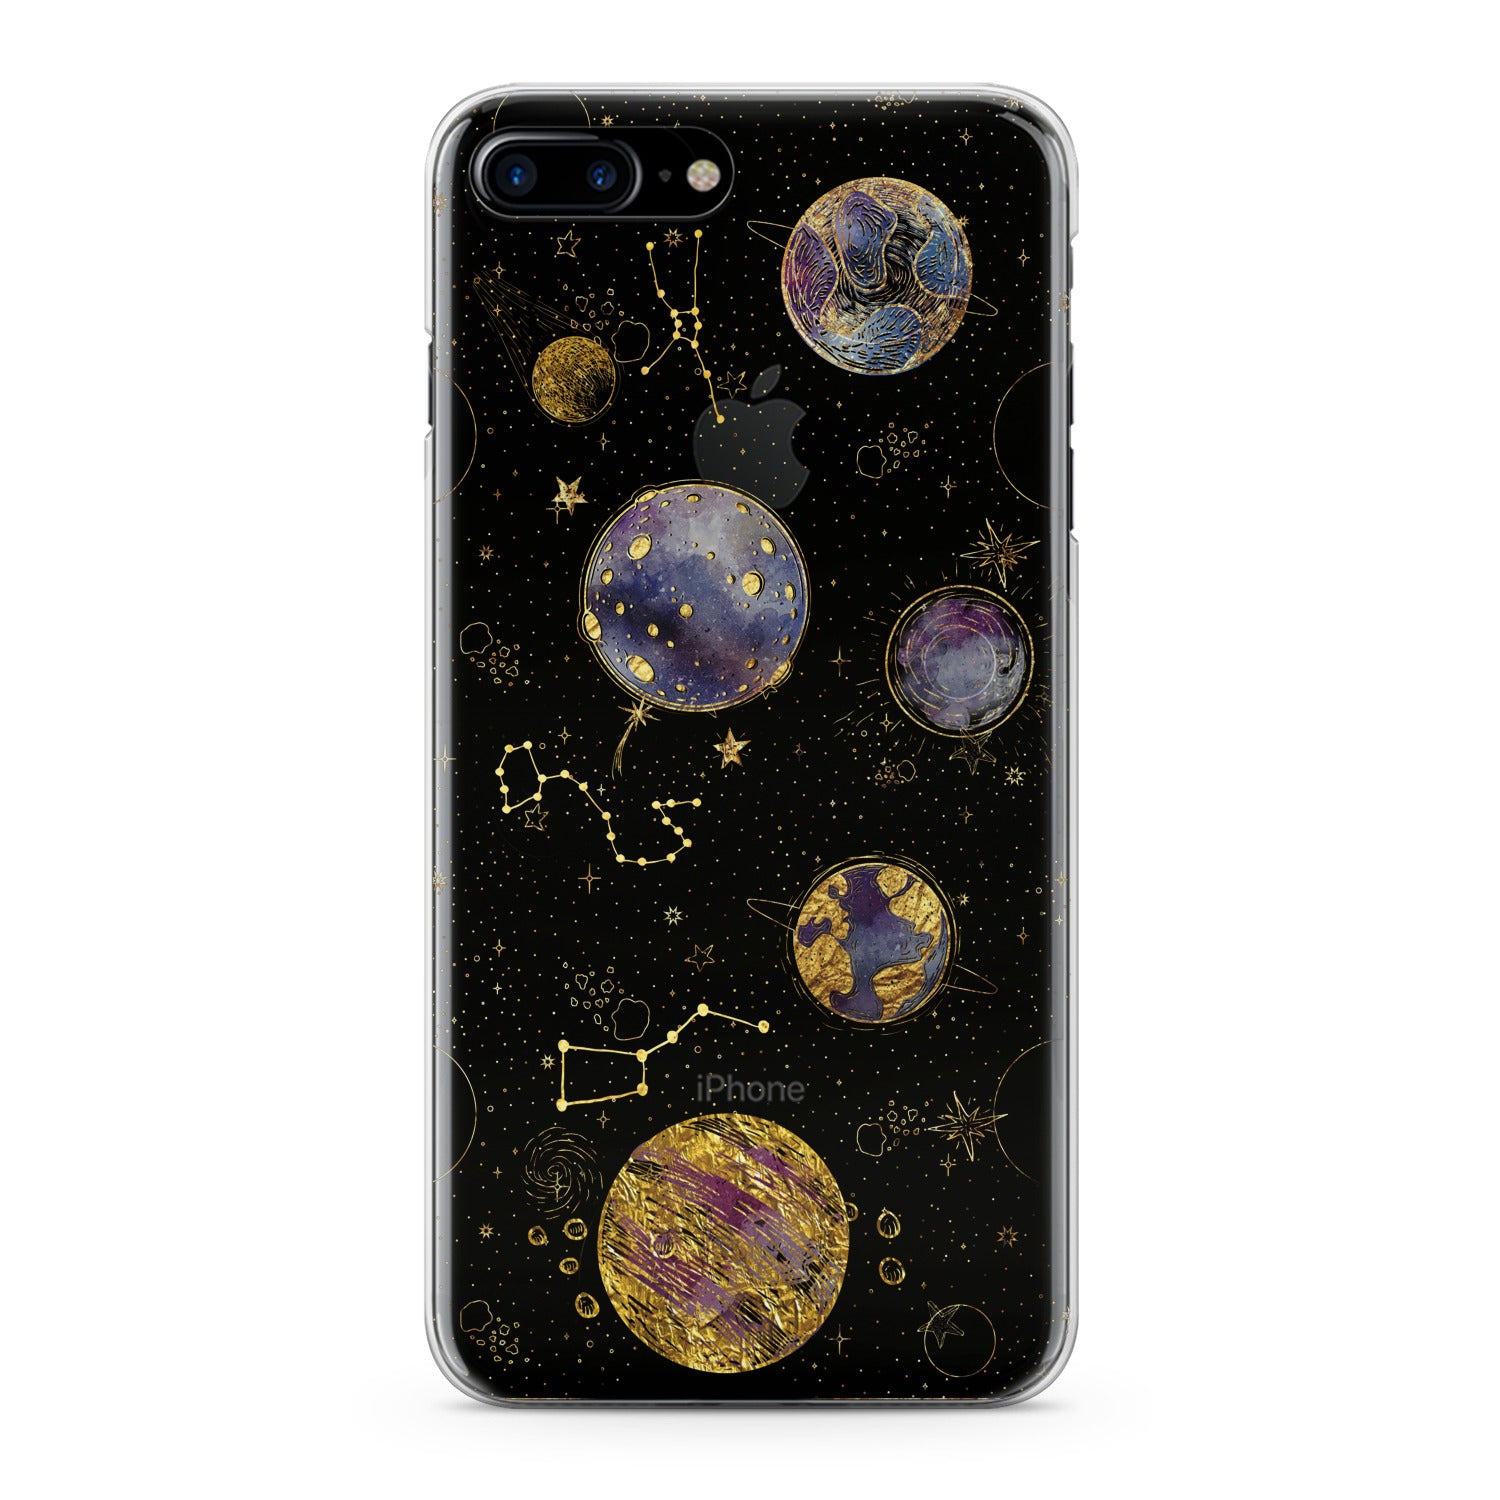 Lex Altern Golden Сonstellation Phone Case for your iPhone & Android phone.